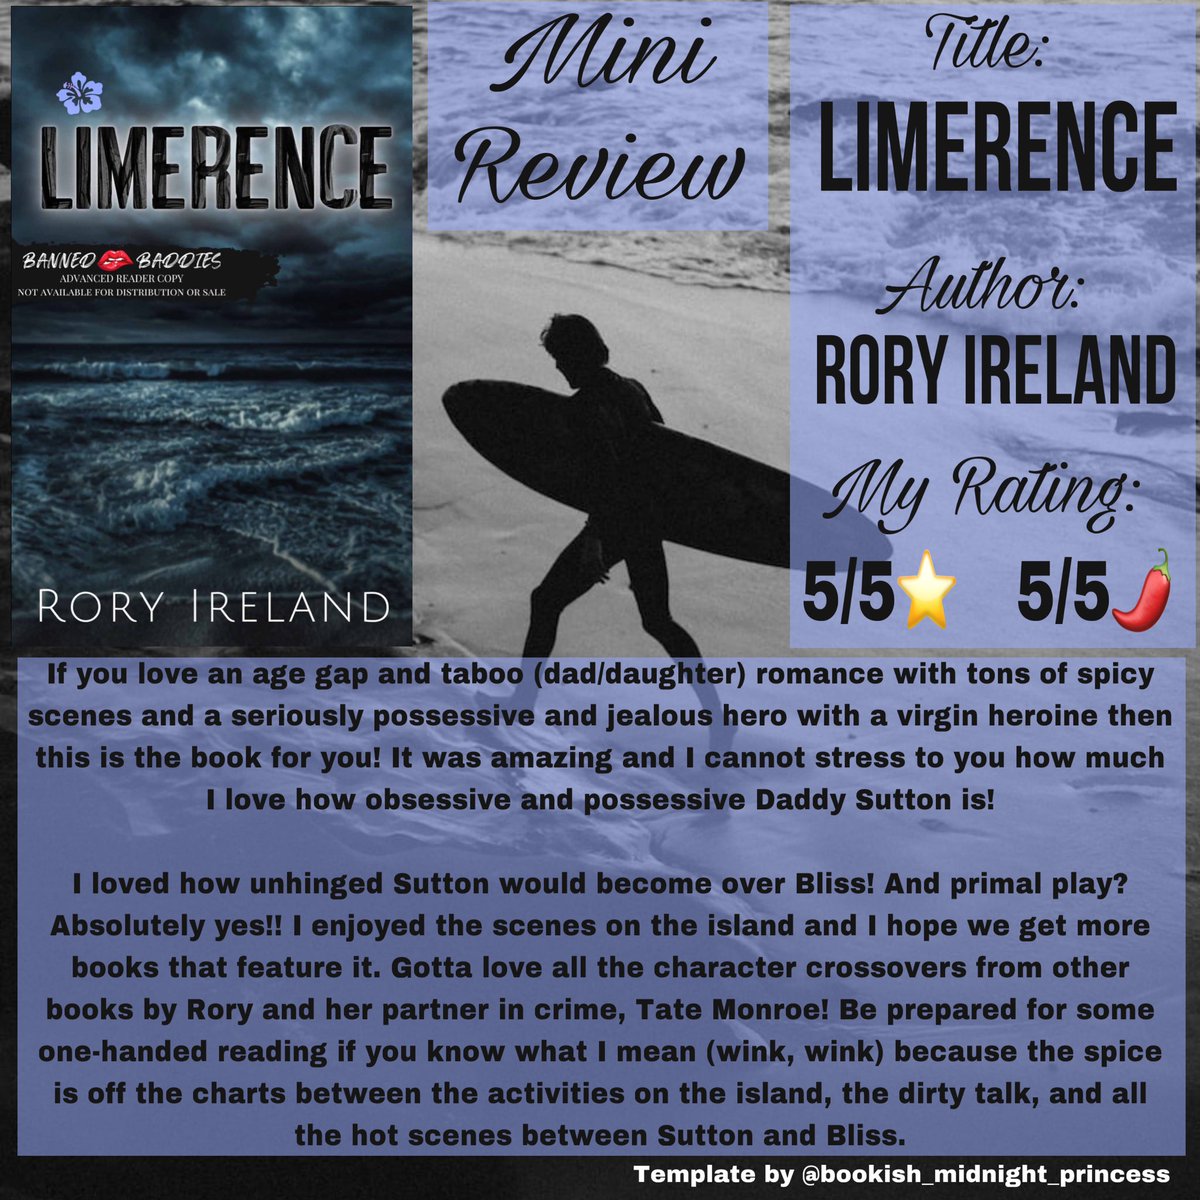 📖ARC Review📖
Limerence by Rory Ireland
Coming Soon!
My Rating: 5/5⭐️   5/5🌶️

#limerence #roryireland #bannedbaddies #tabooromance #taboobooks #agegapromance #spicybooks #comingsoon #arcreview #bookreview #virginheroine #possessivehero #otthero #bookstagram